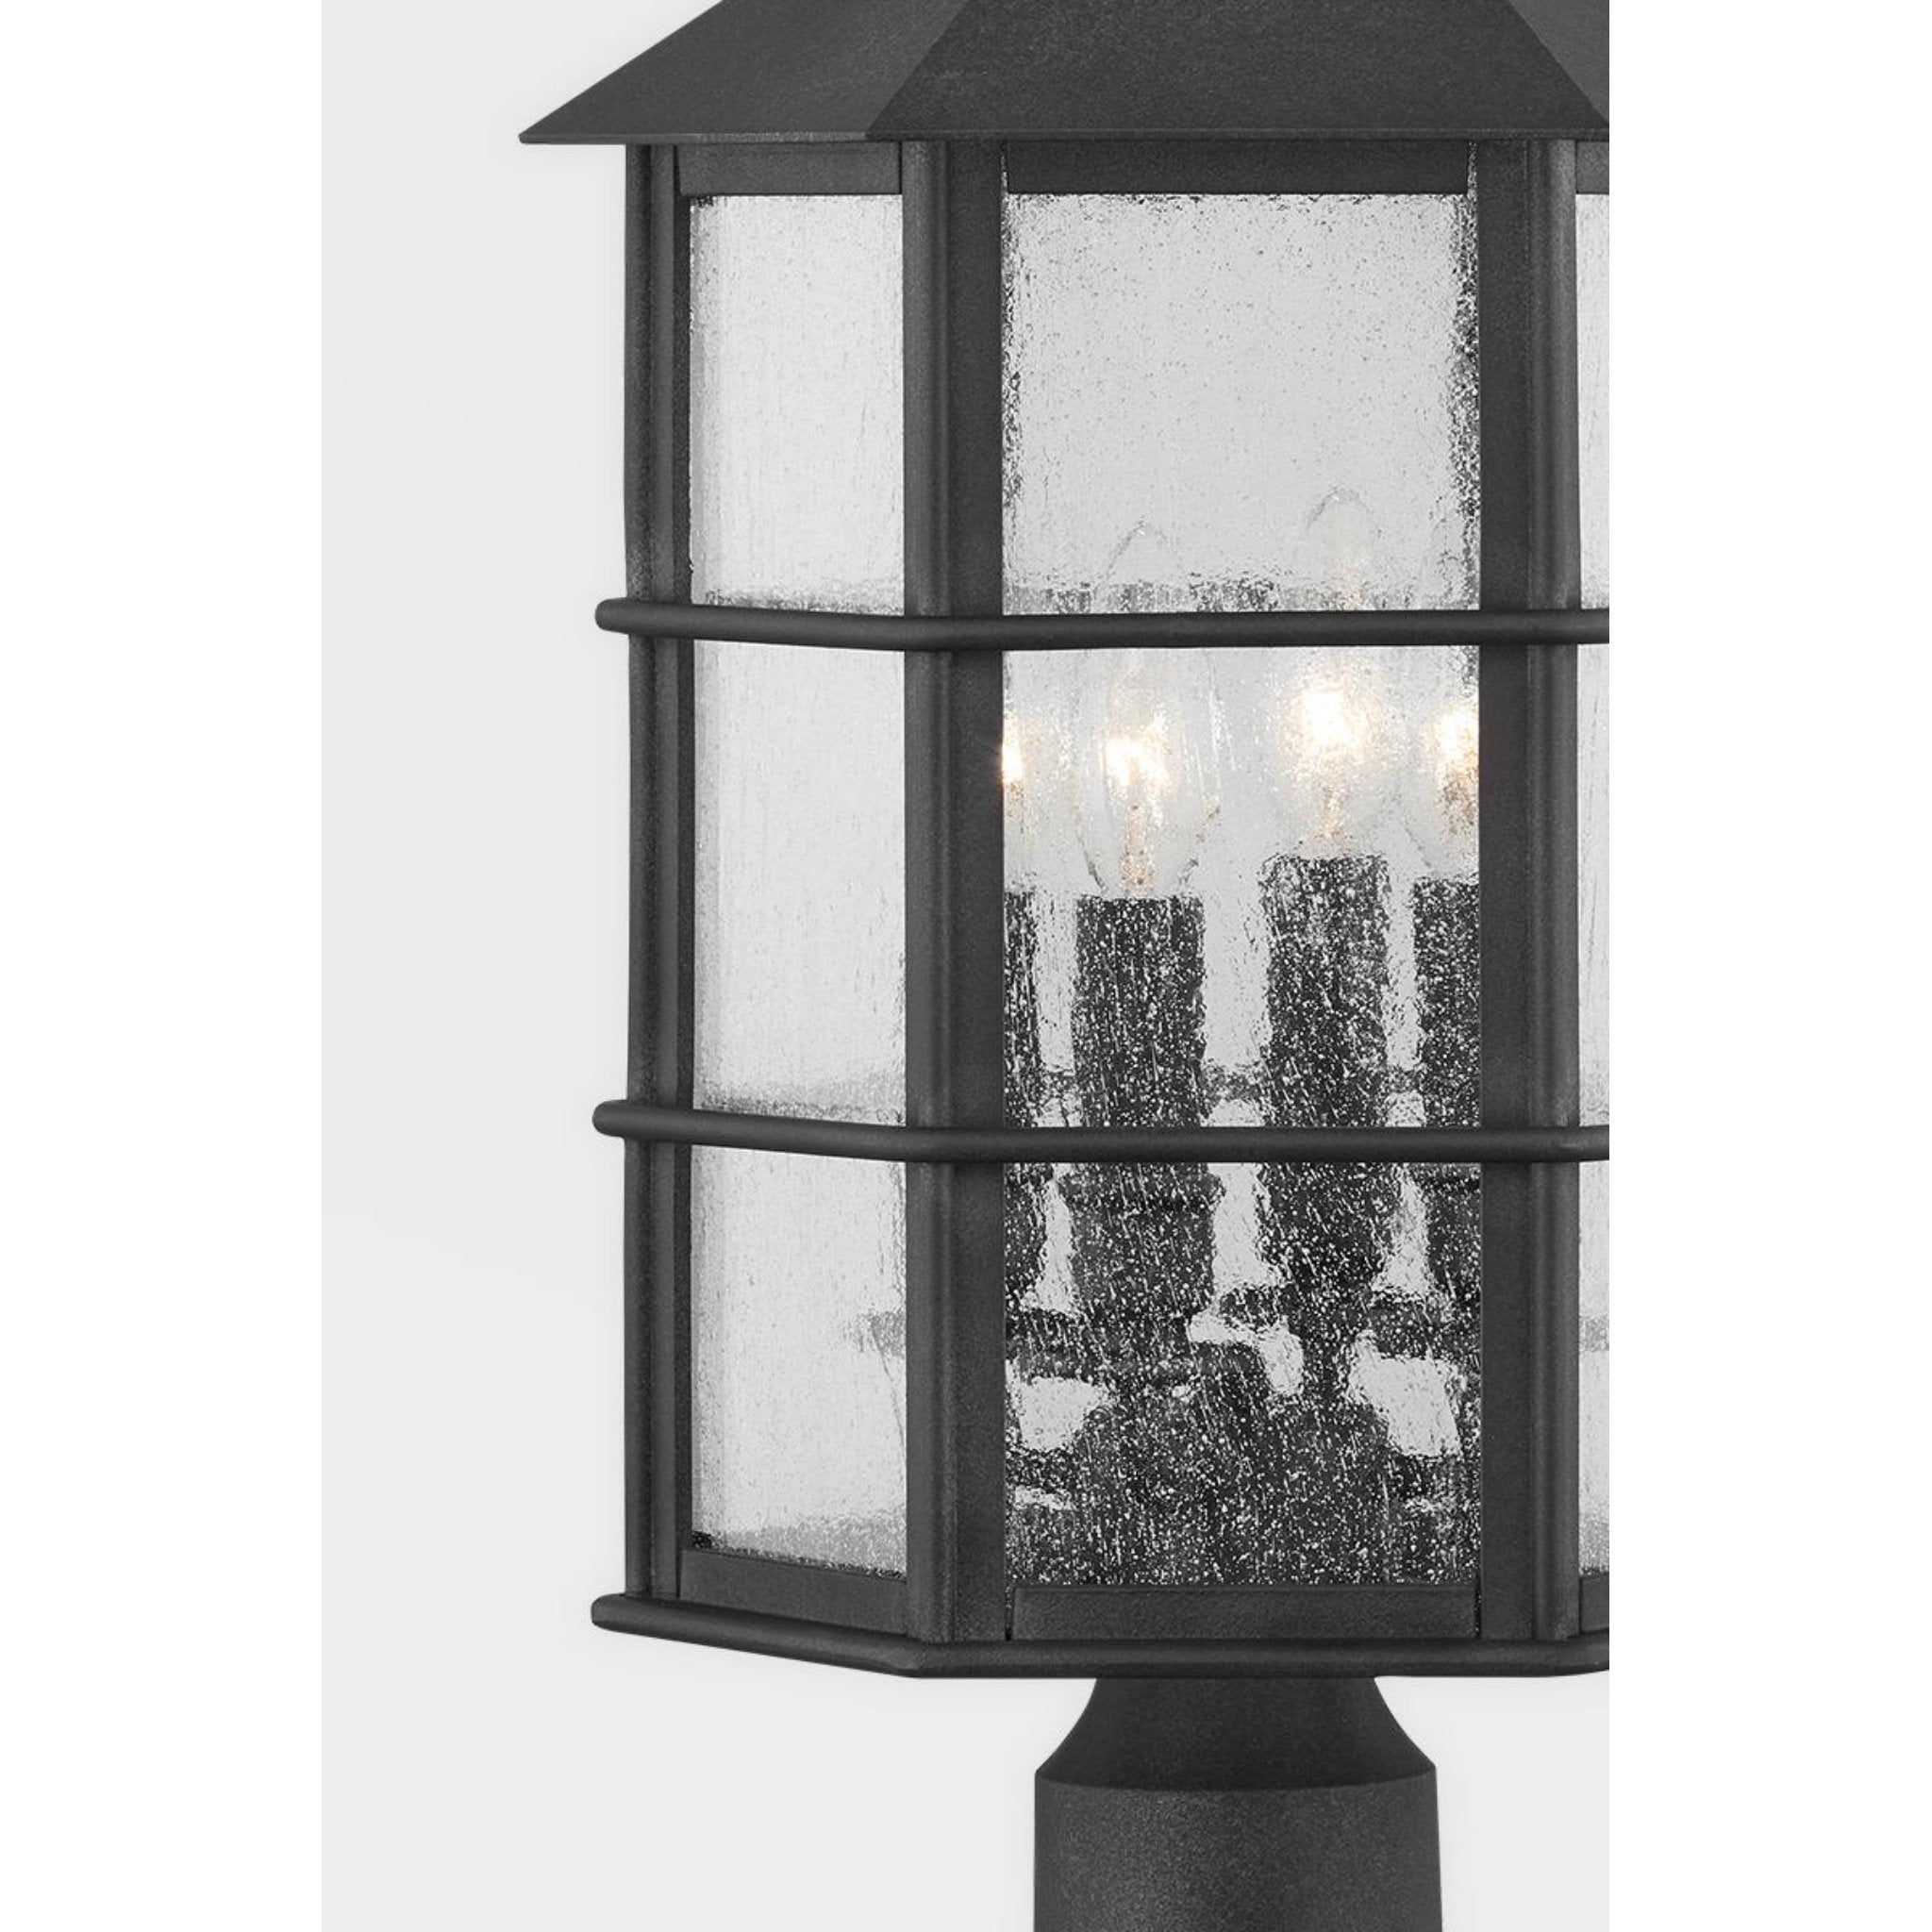 Lake County 4 Light Wall Sconce in French Iron by Mark D. Sikes